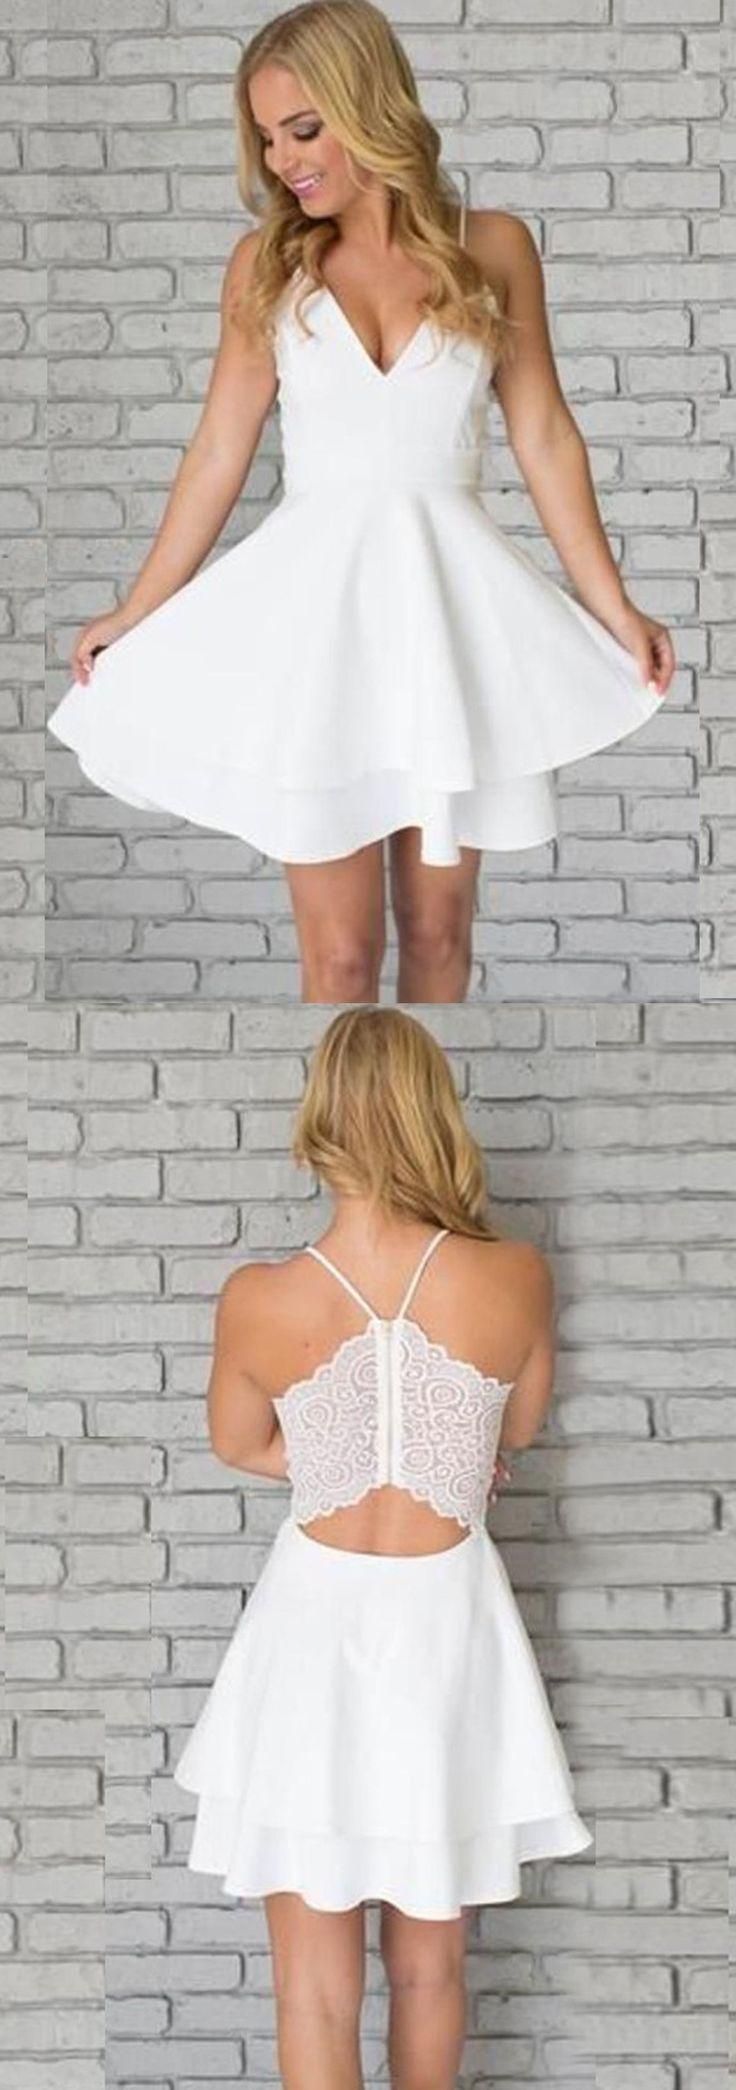 Hochzeit - A-Line Spaghetti Straps Short White Satin Homecoming Dress With Lace